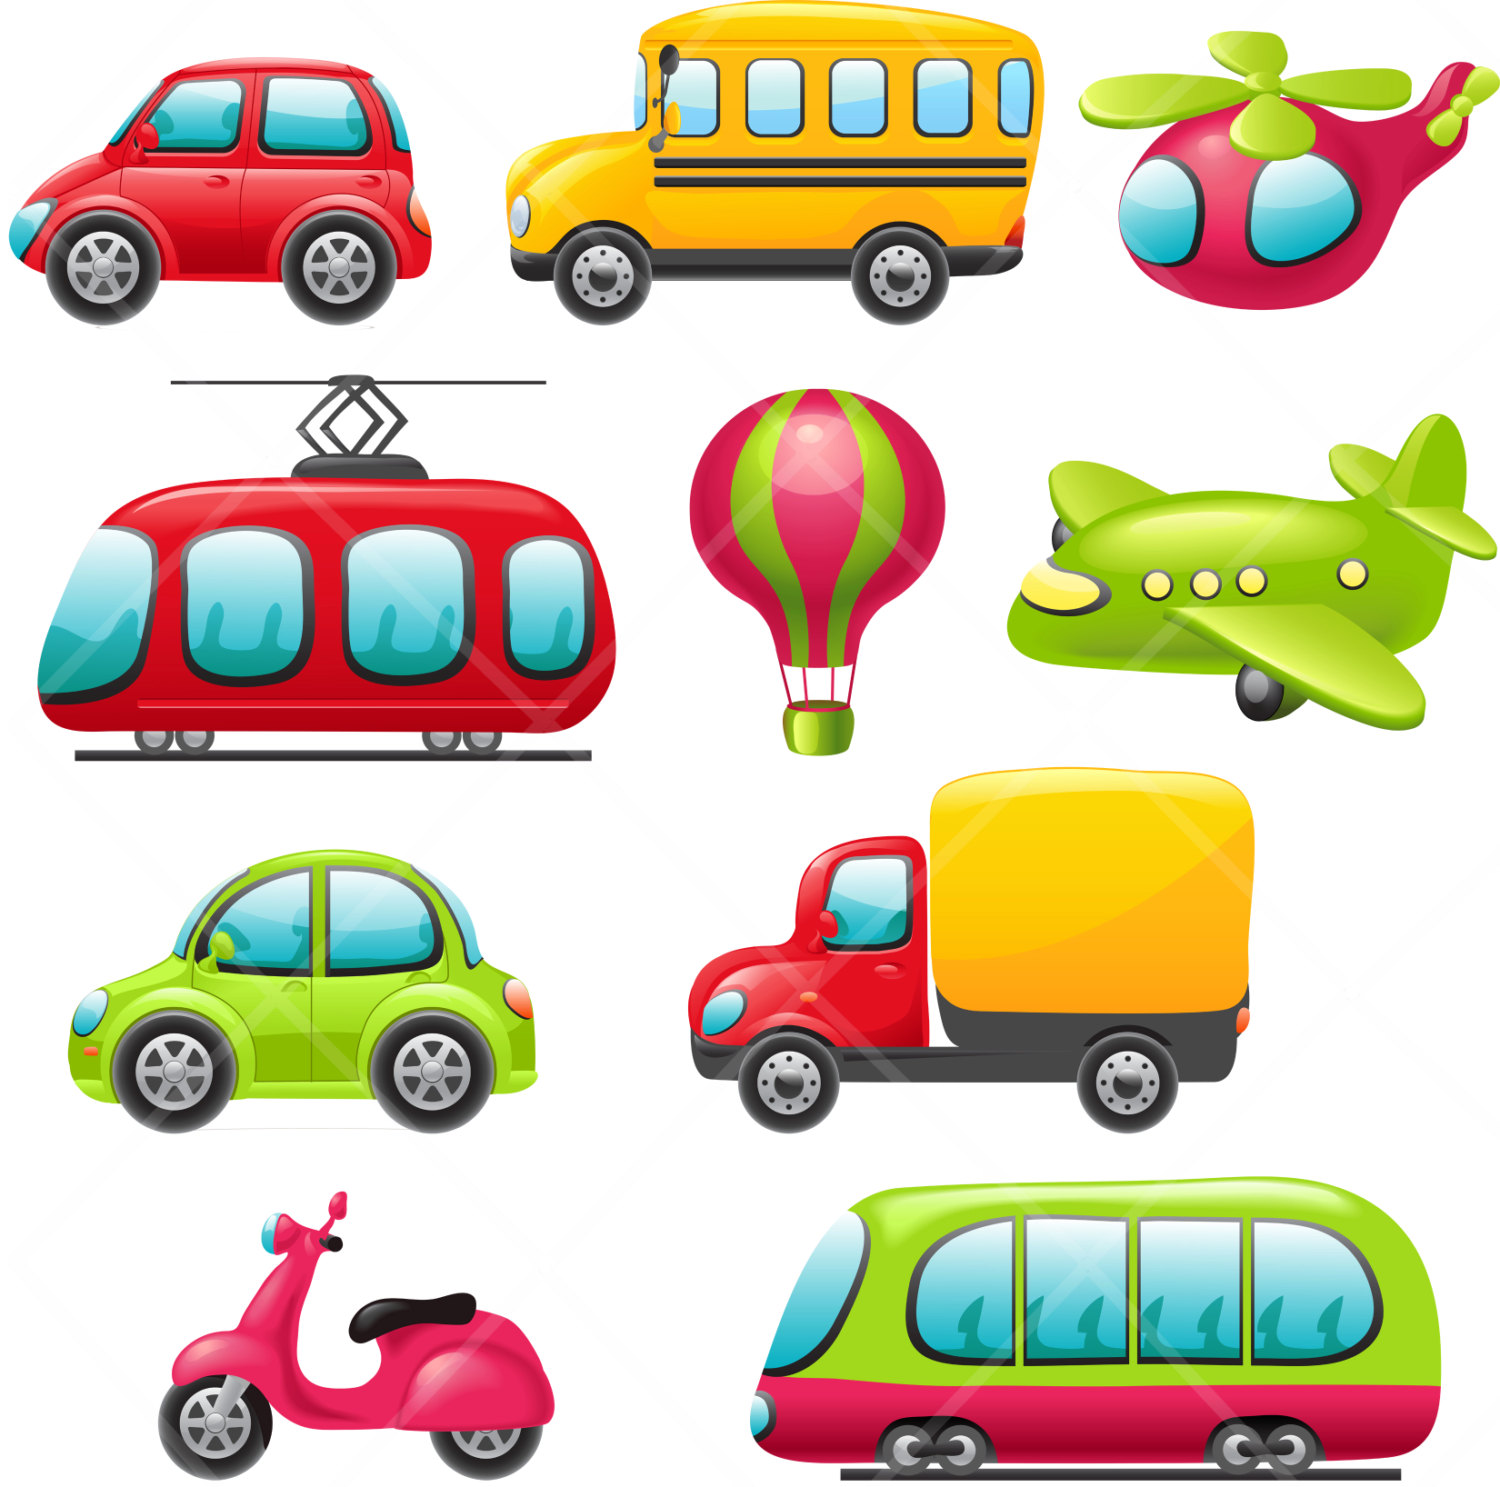 Transportation clipart toy. Car wikiclipart 